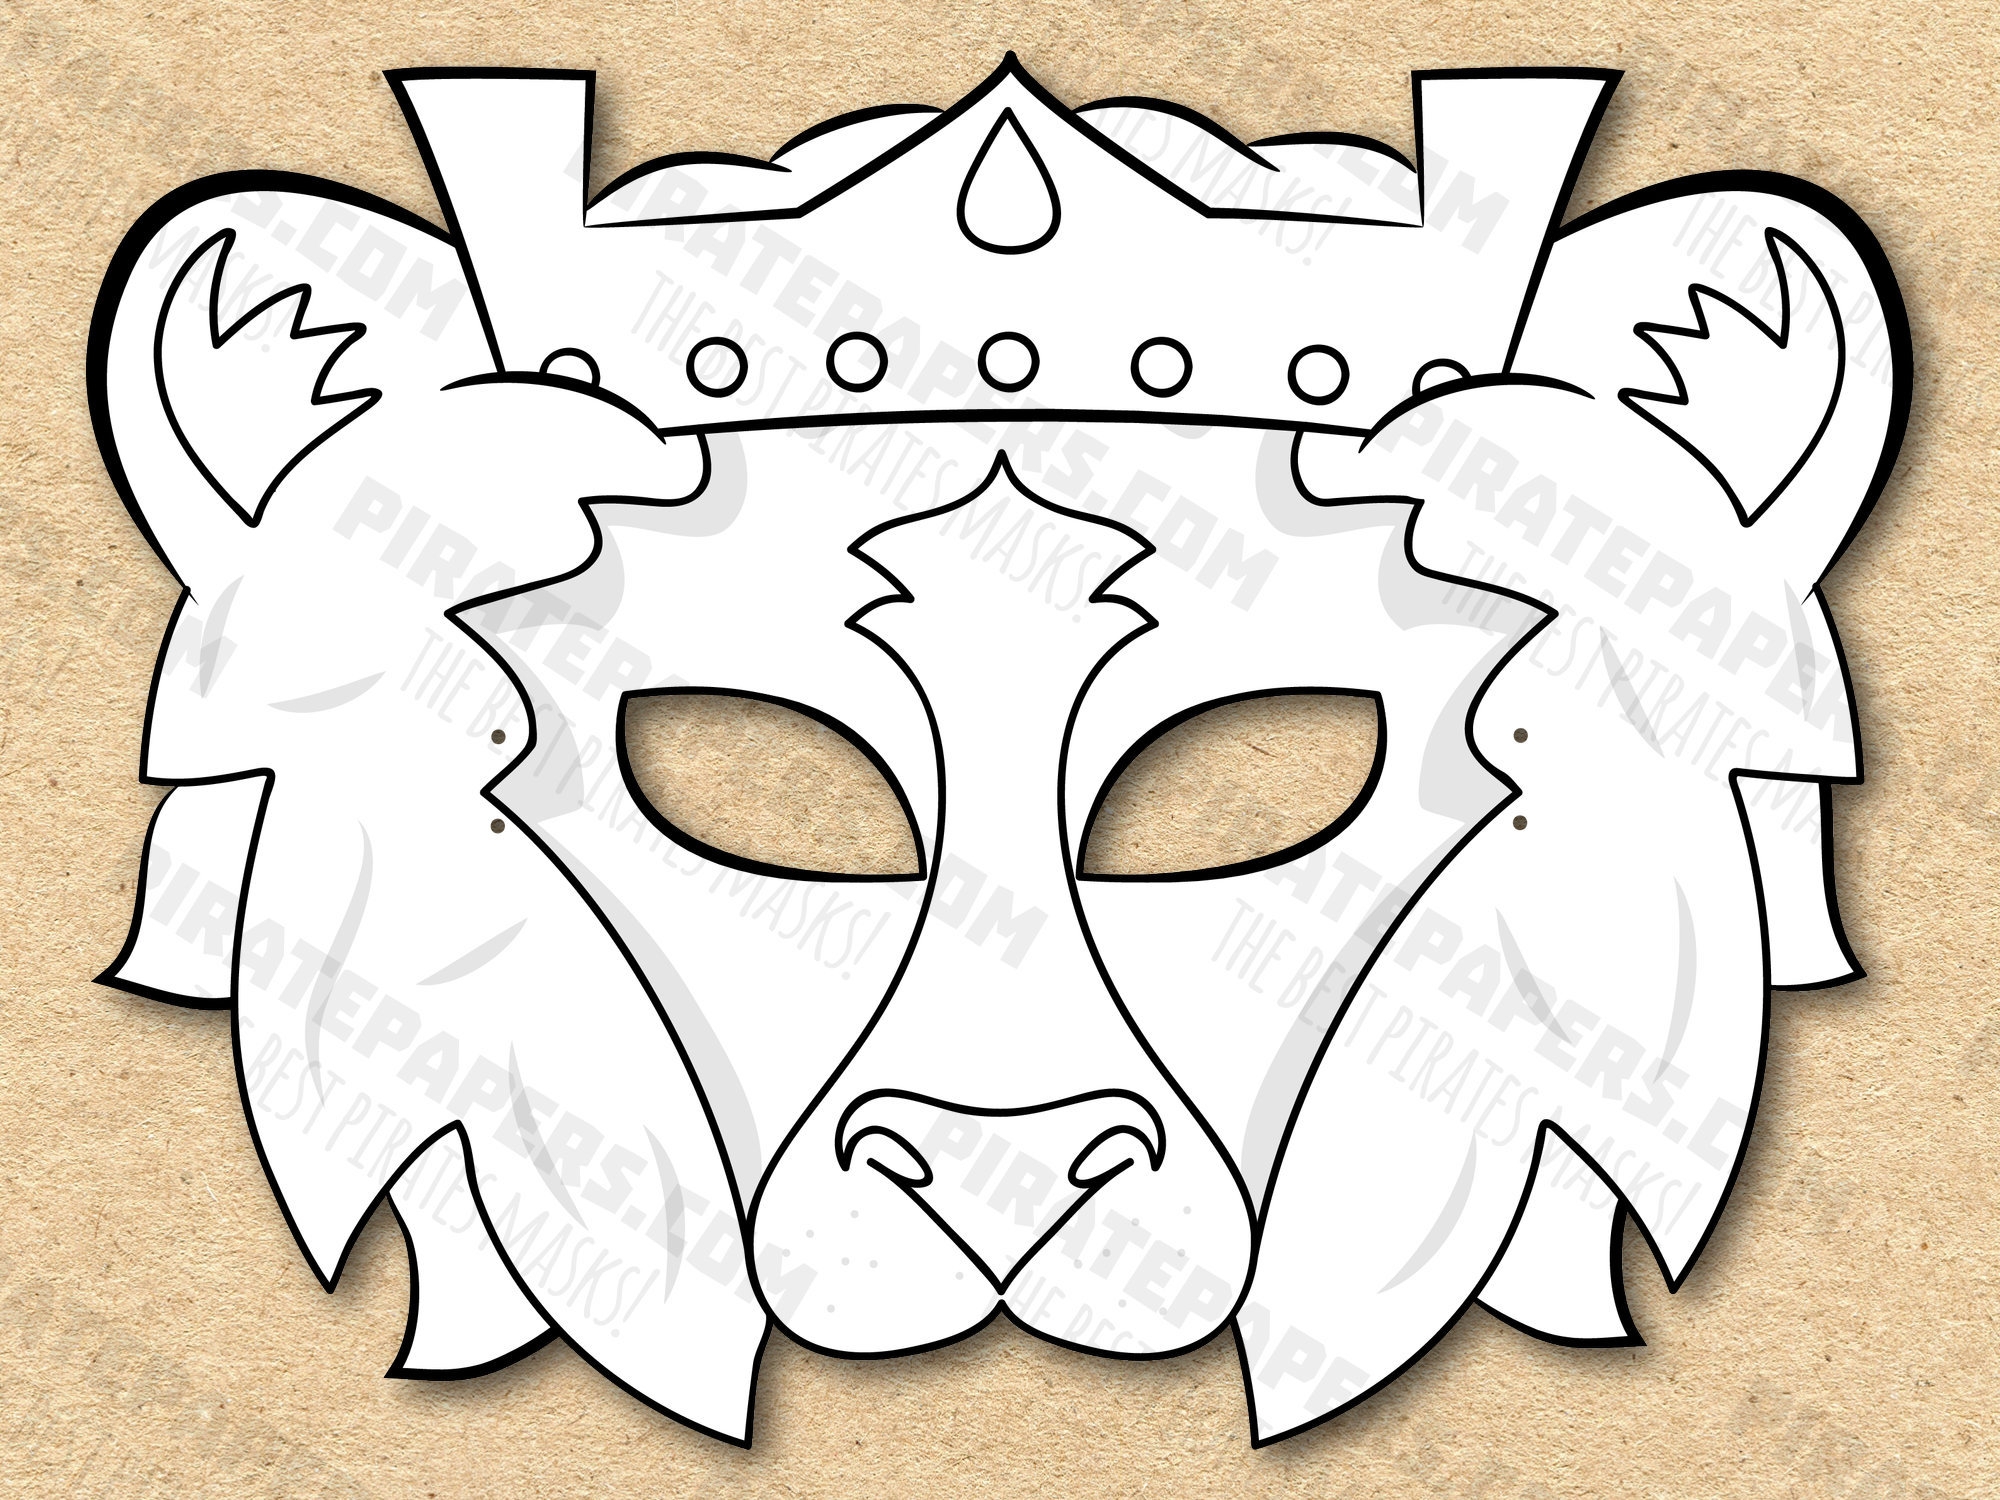 Lion King Mask Printable Coloring Paper DIY For Kids And Adults PDF Template Instant Download For Birthdays Halloween Party Costumes Etsy